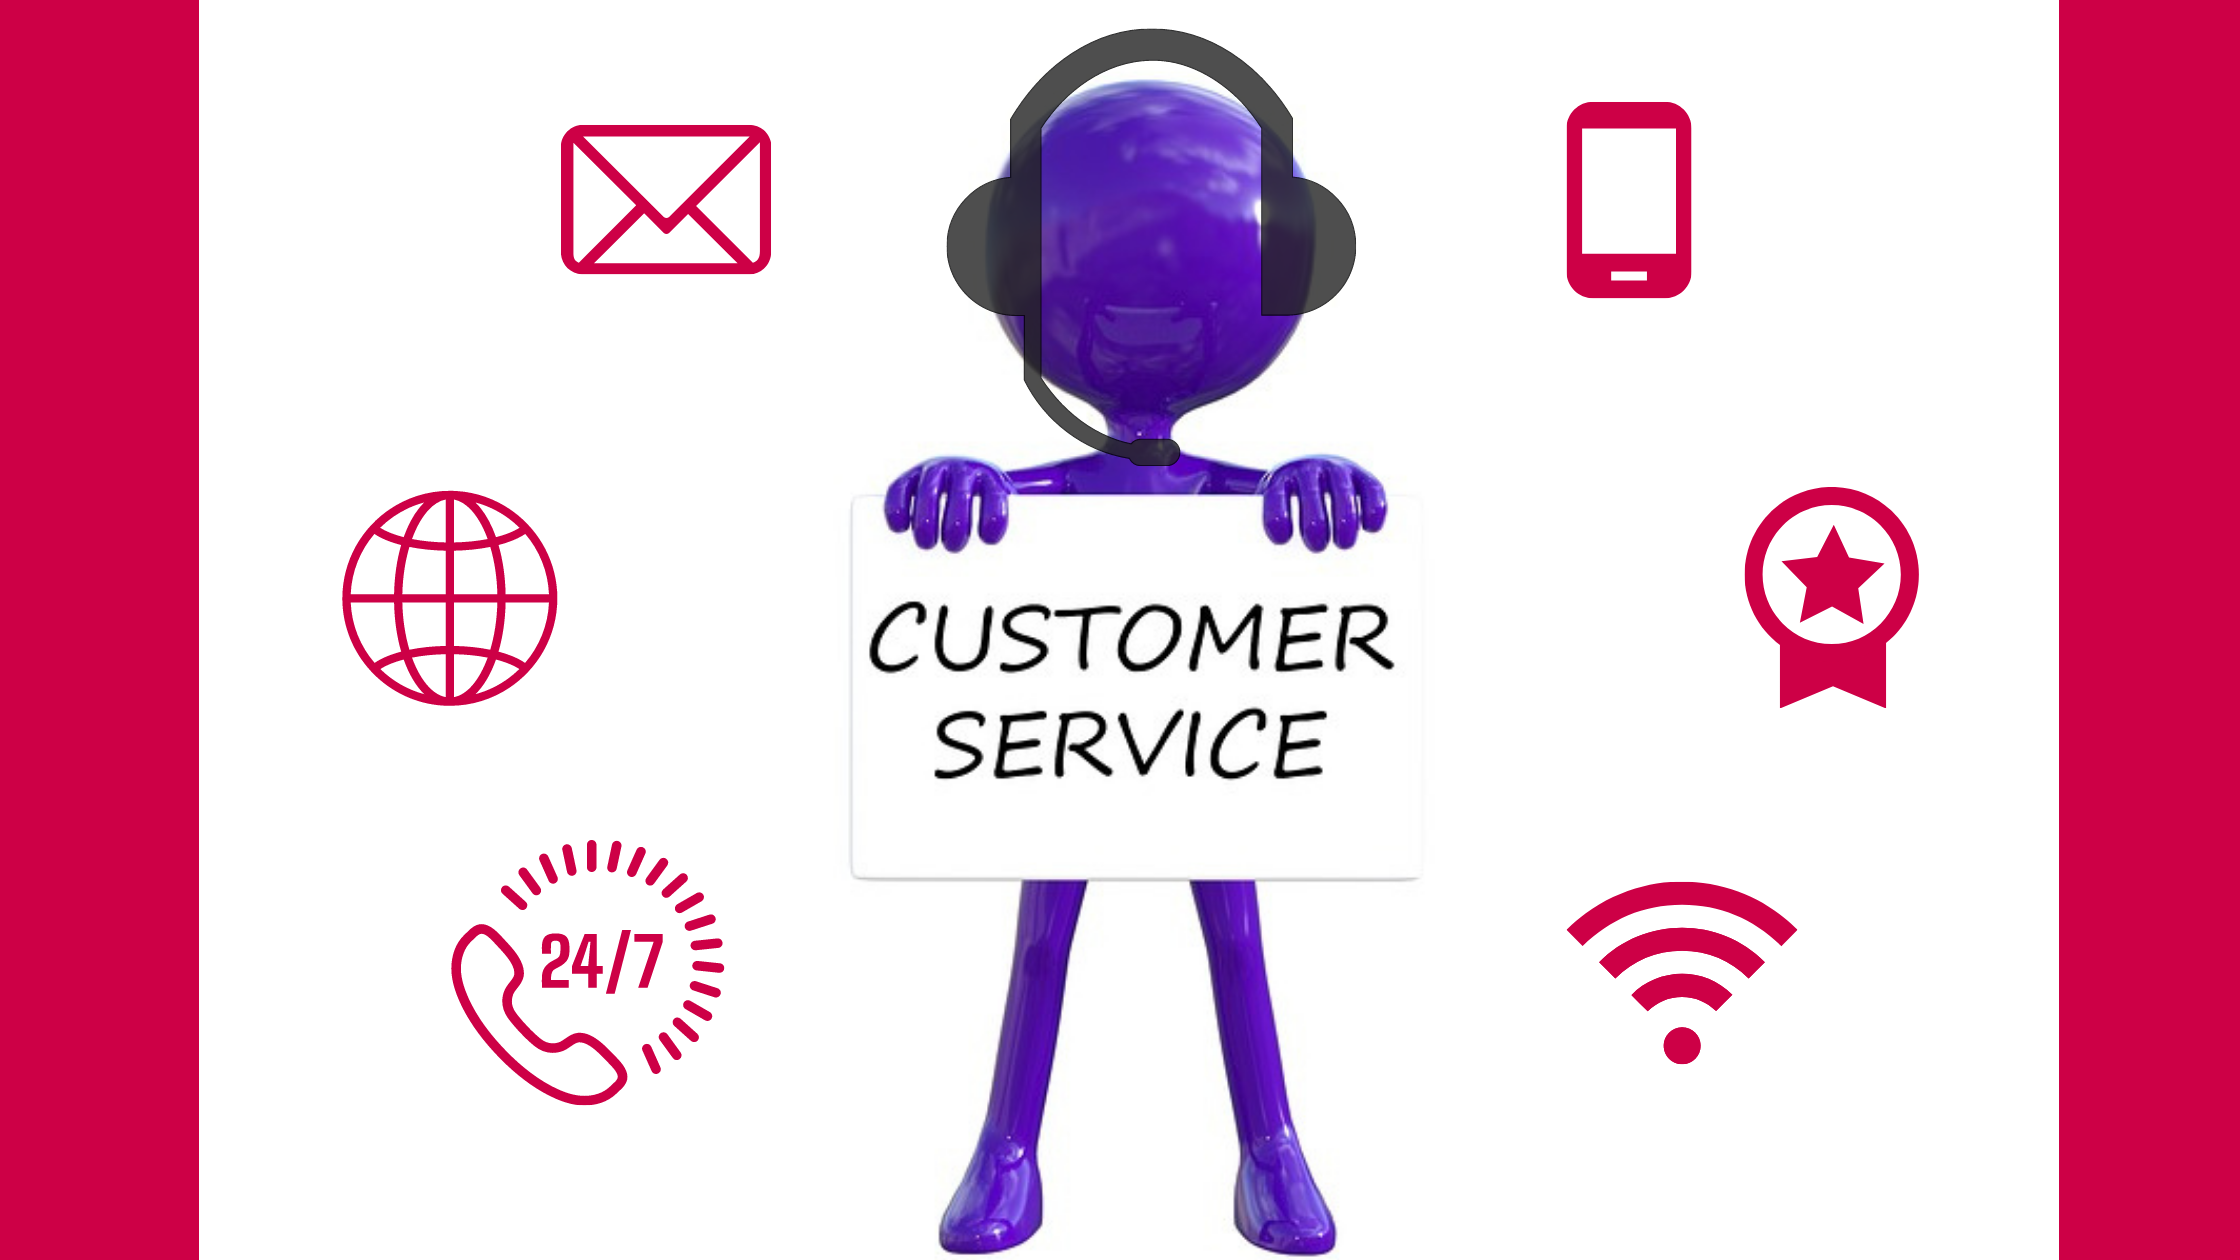 KloudPortal's Customer Service team can help you to improve your brand image.